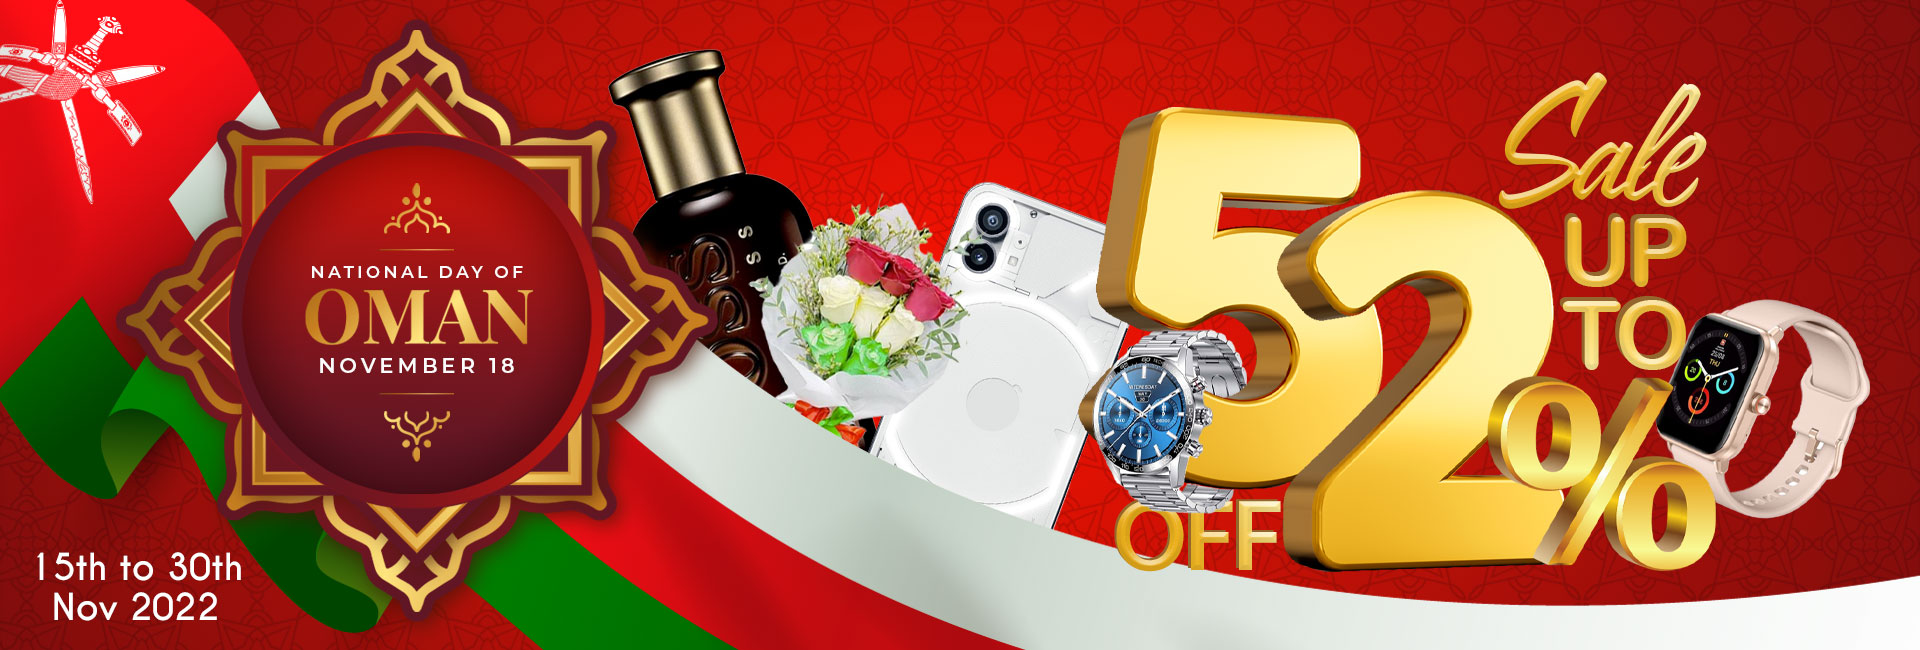 oman national day offers